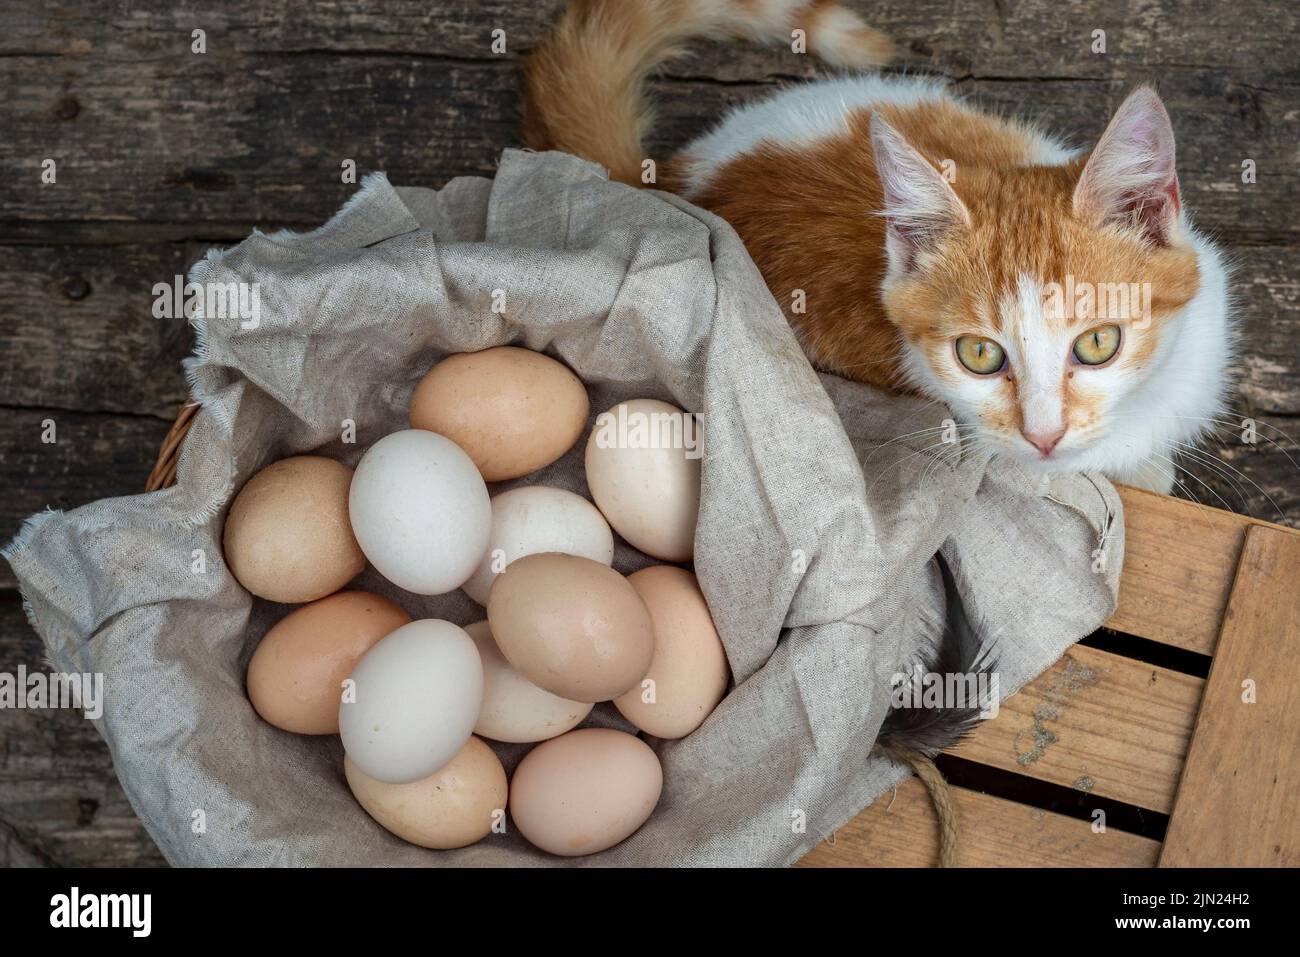 cat looking camera, organic eggs wooden table background Food Rustic Still Life sack bag wicker basket chicken feathers linen napkin countryside Inves Stock Photo